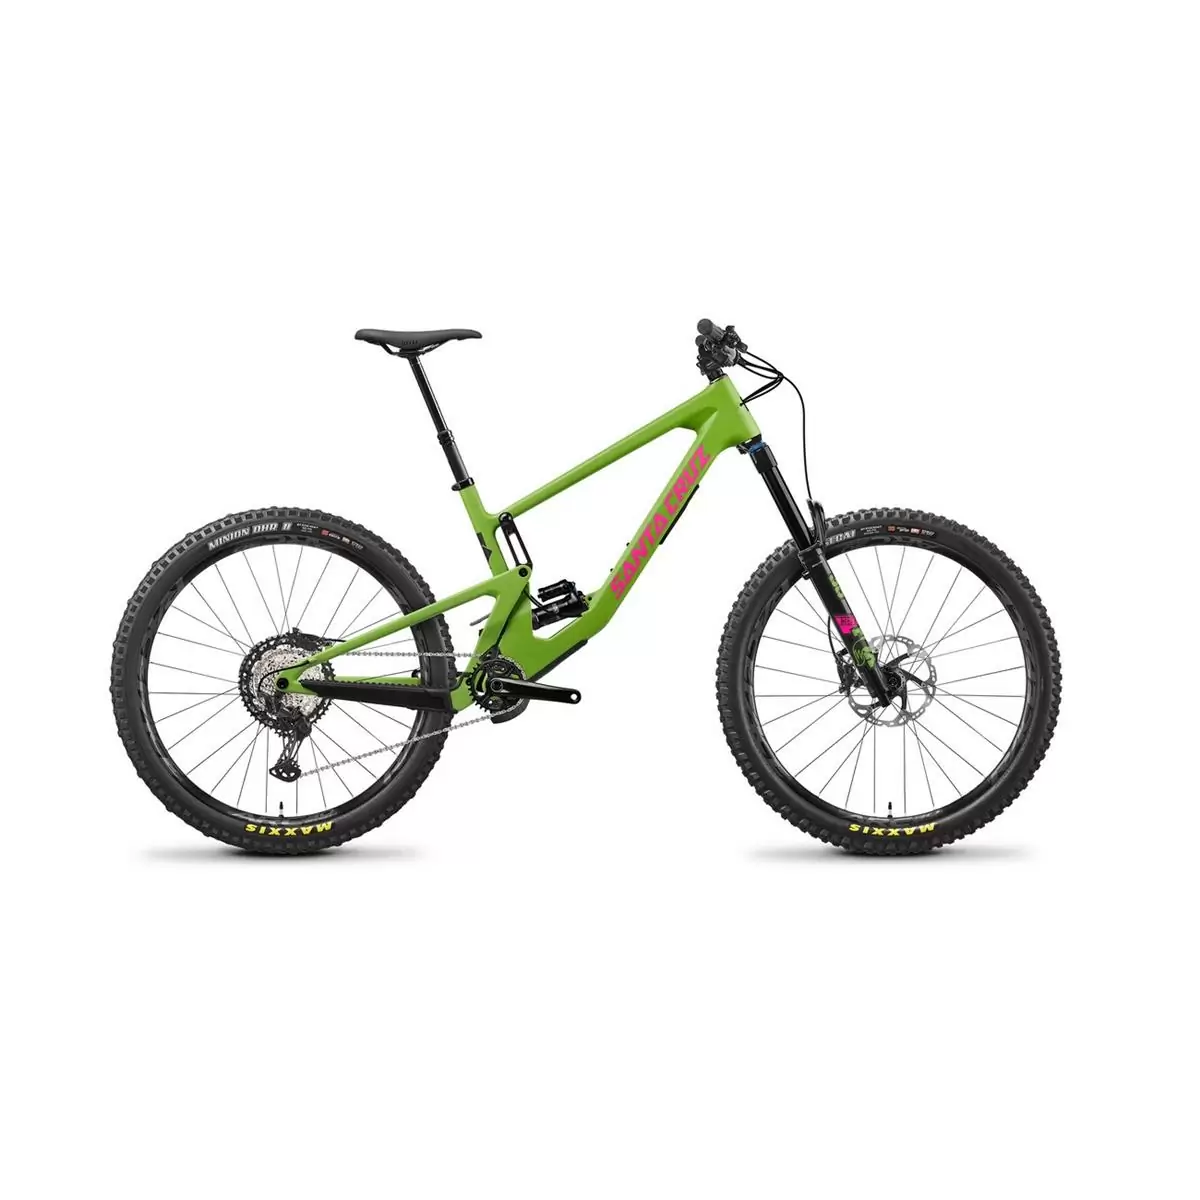 Nomad 5 C XT 27,5'' 170mm 12s Green Size S - image